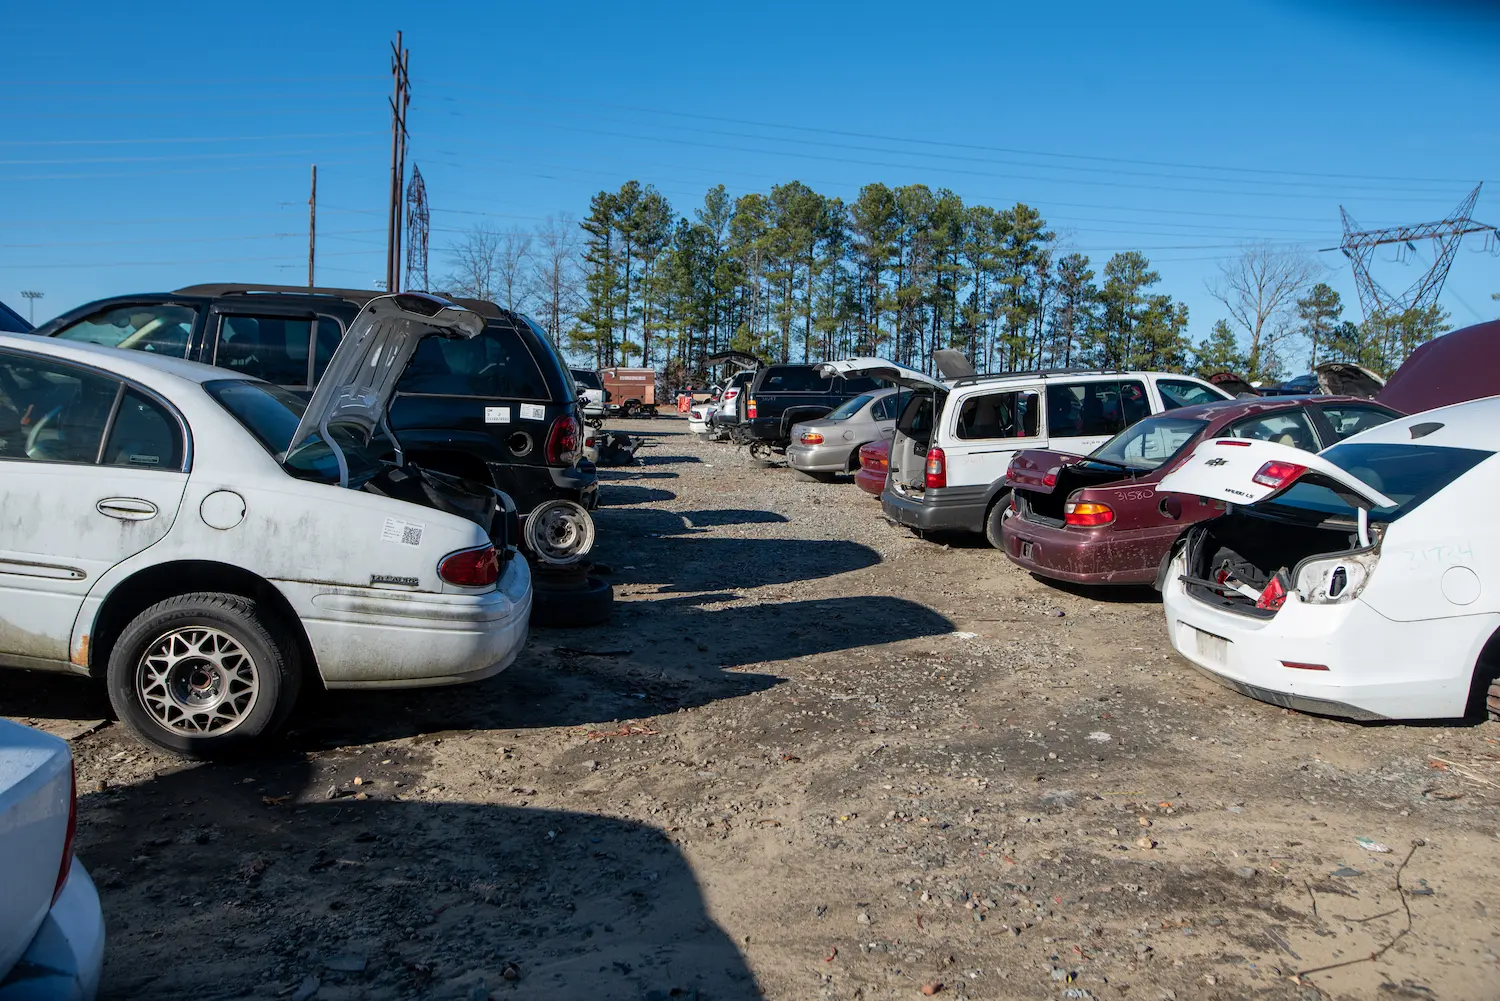 Rows of junked cars